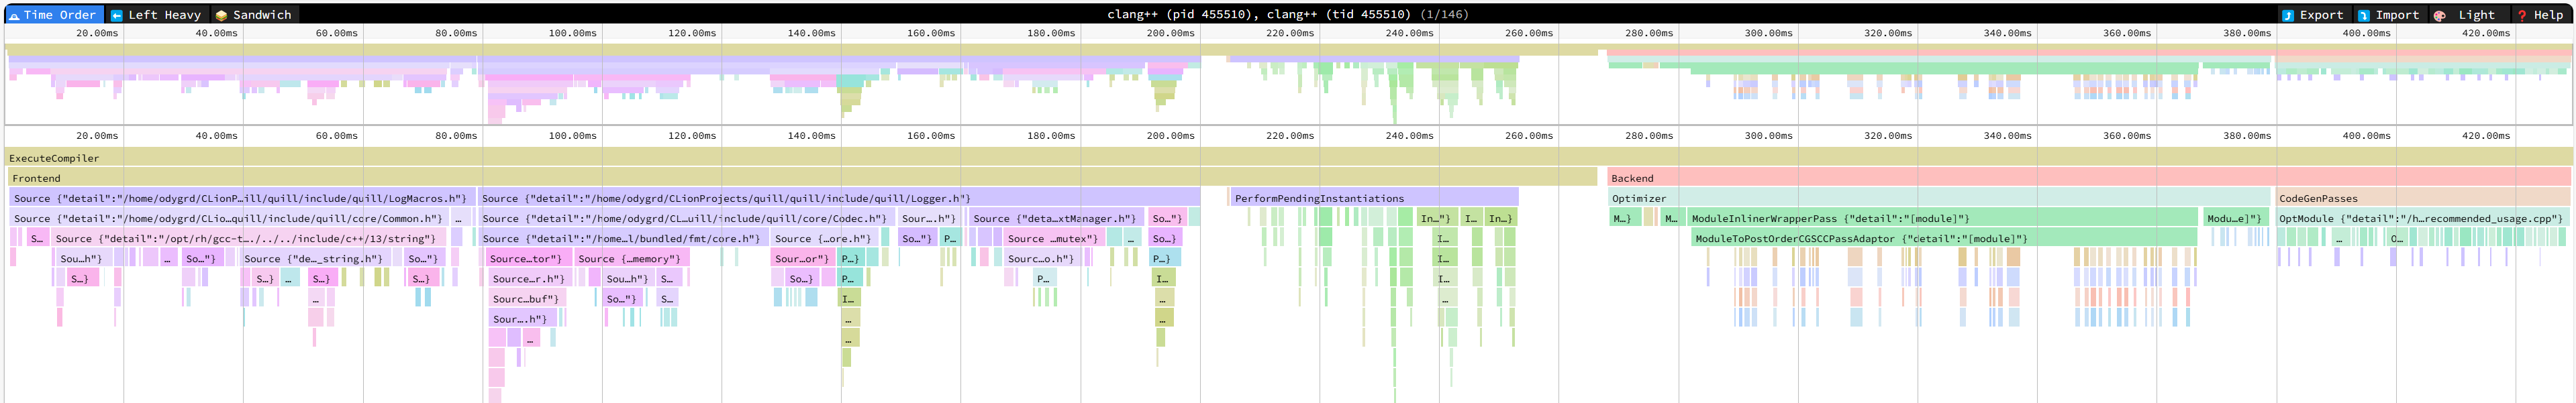 quill_v4_1_compiler_profile.speedscope.png